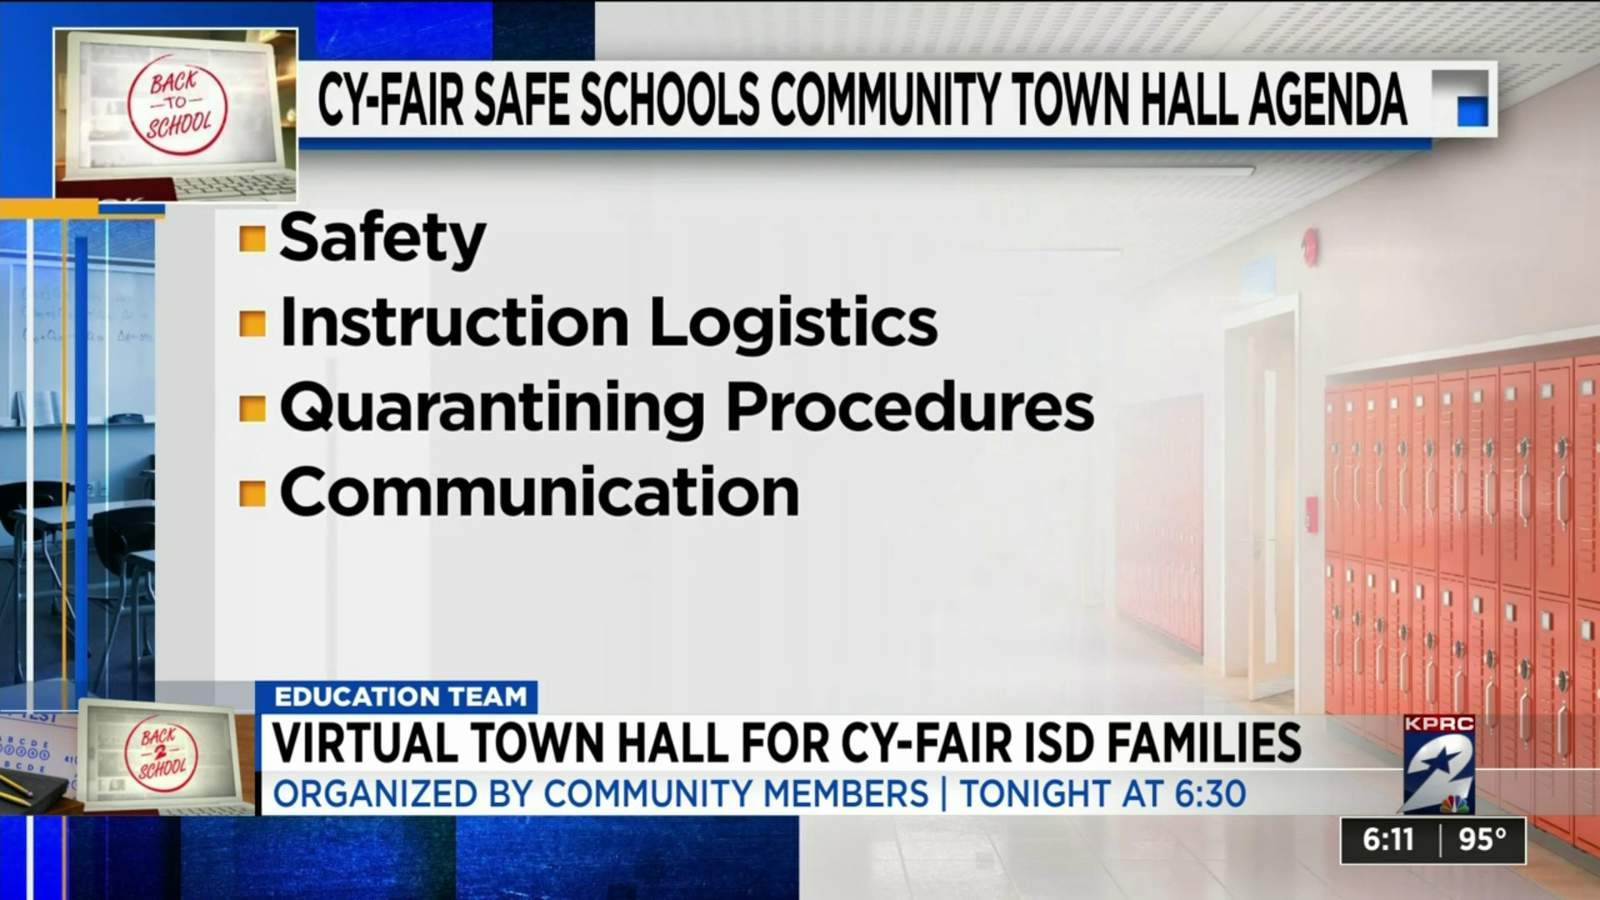 Cy-Fair ISD community town hall aims to give parents, educators pediatricians a place to voice concerns